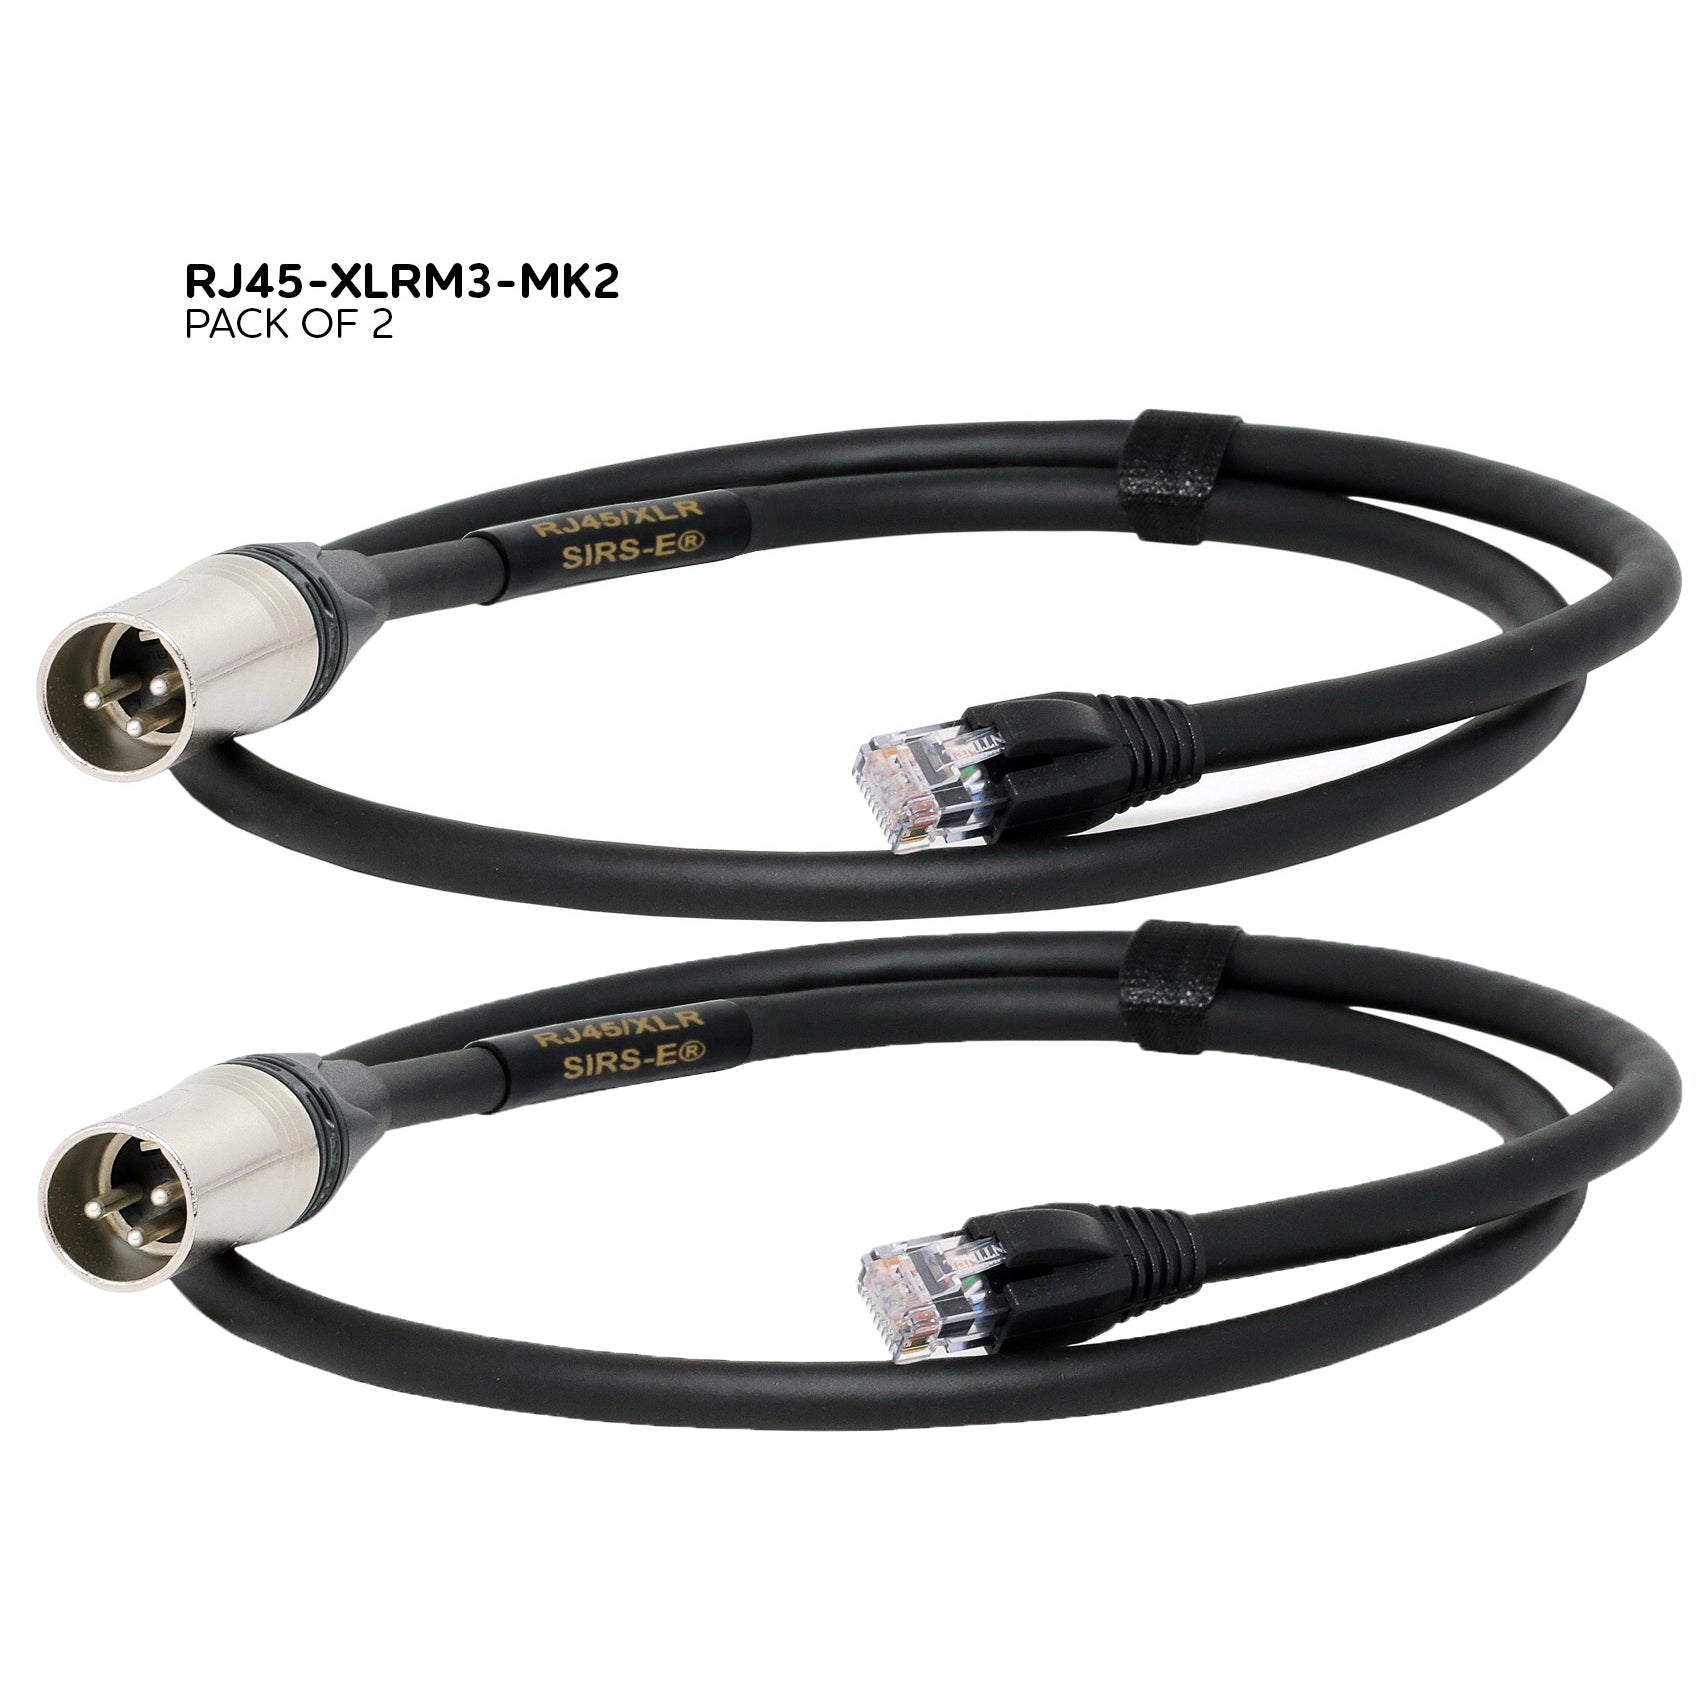 Pack of 2 - SIRS-E Heavy Duty RJ45 to XLR 3ft DMX Cable Adapter for DM –